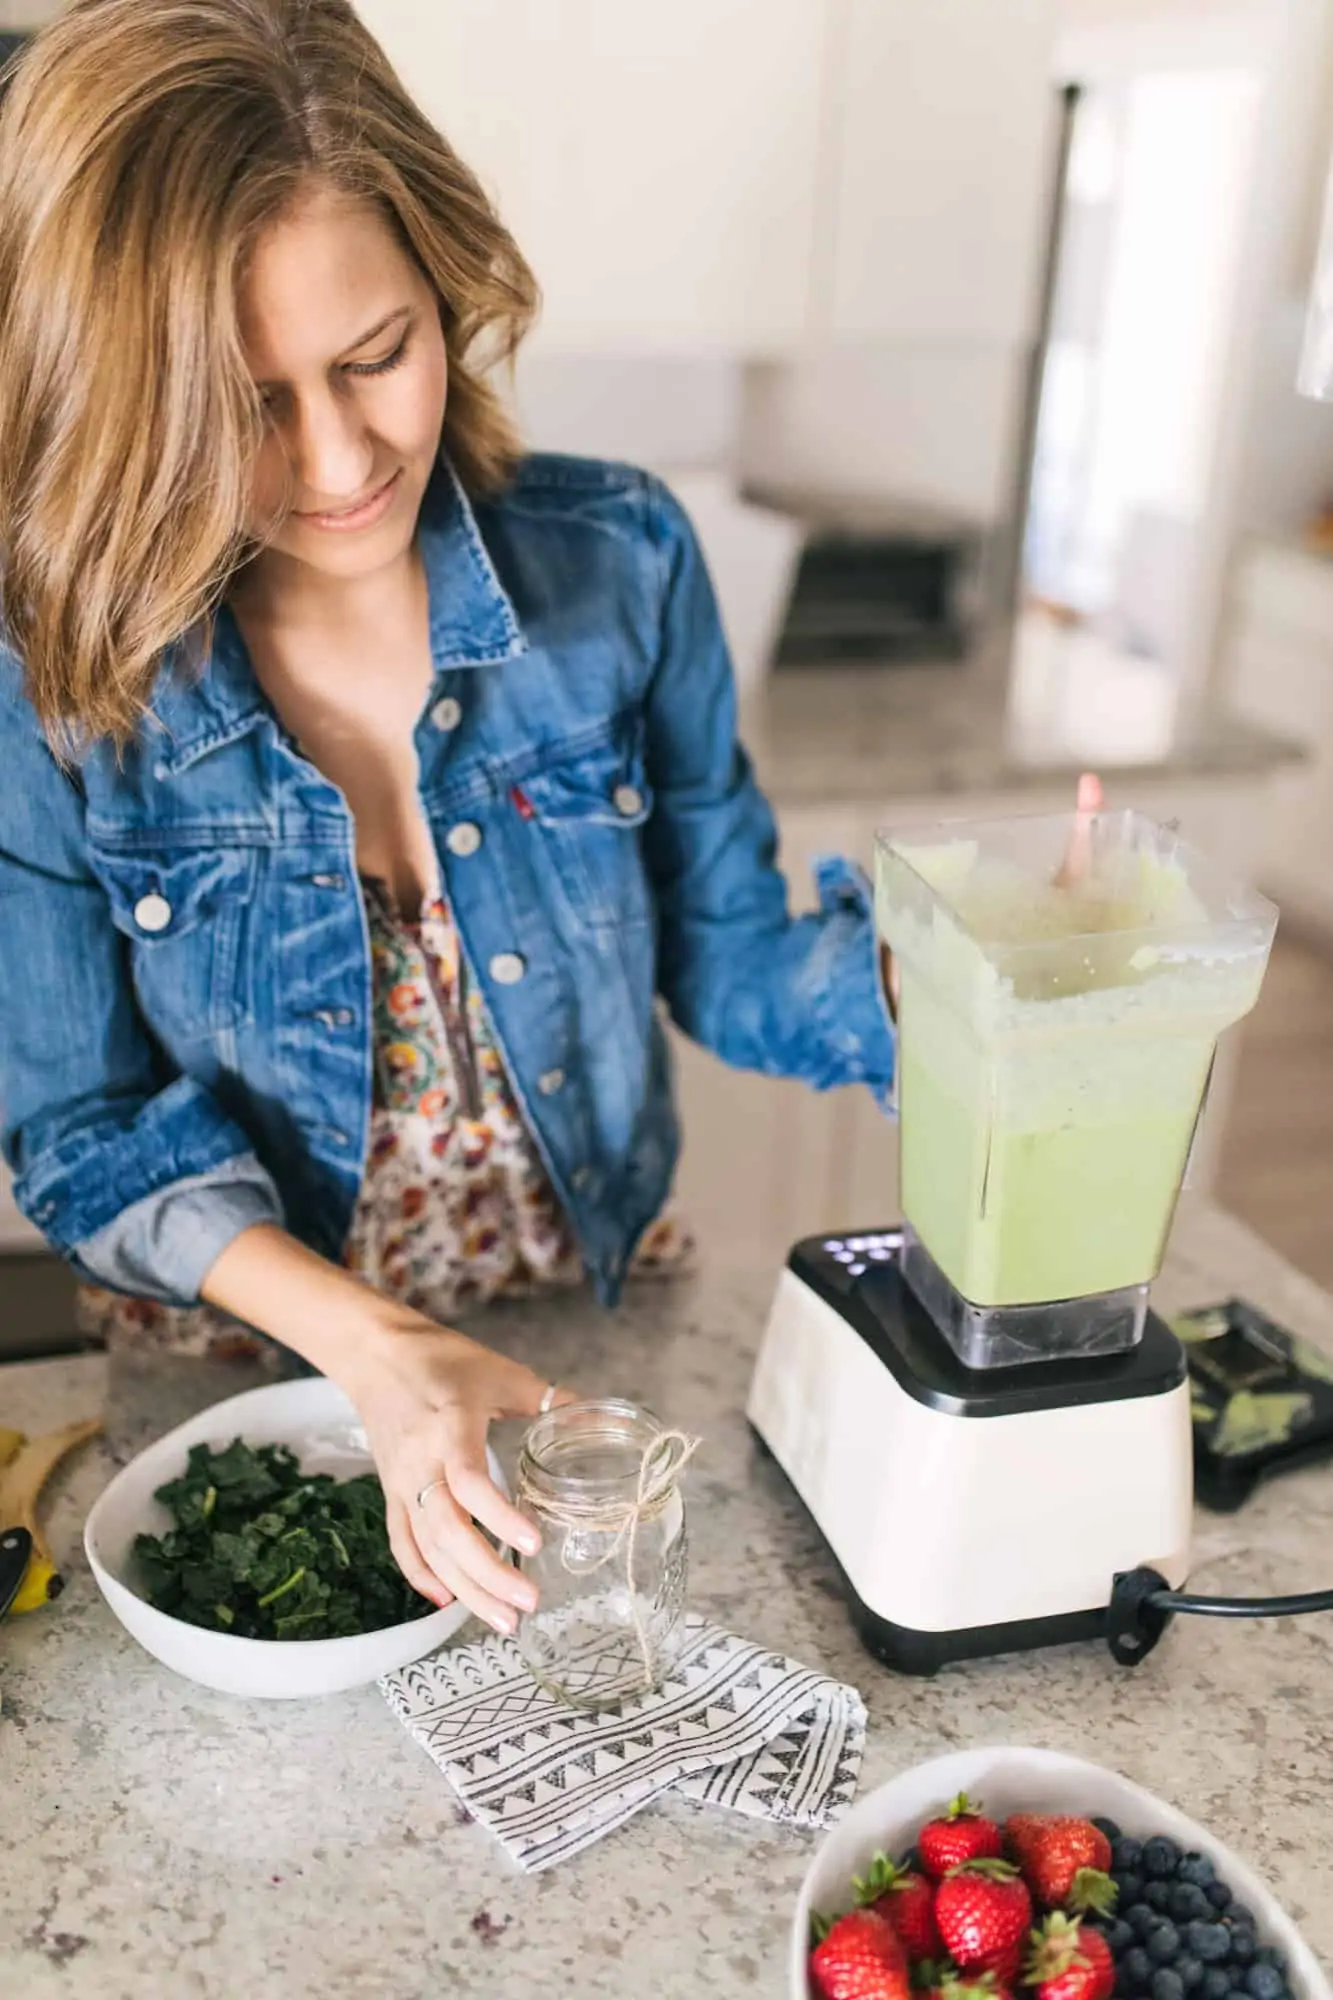 Michelle Cehn Making A Green Smoothie From A Blender